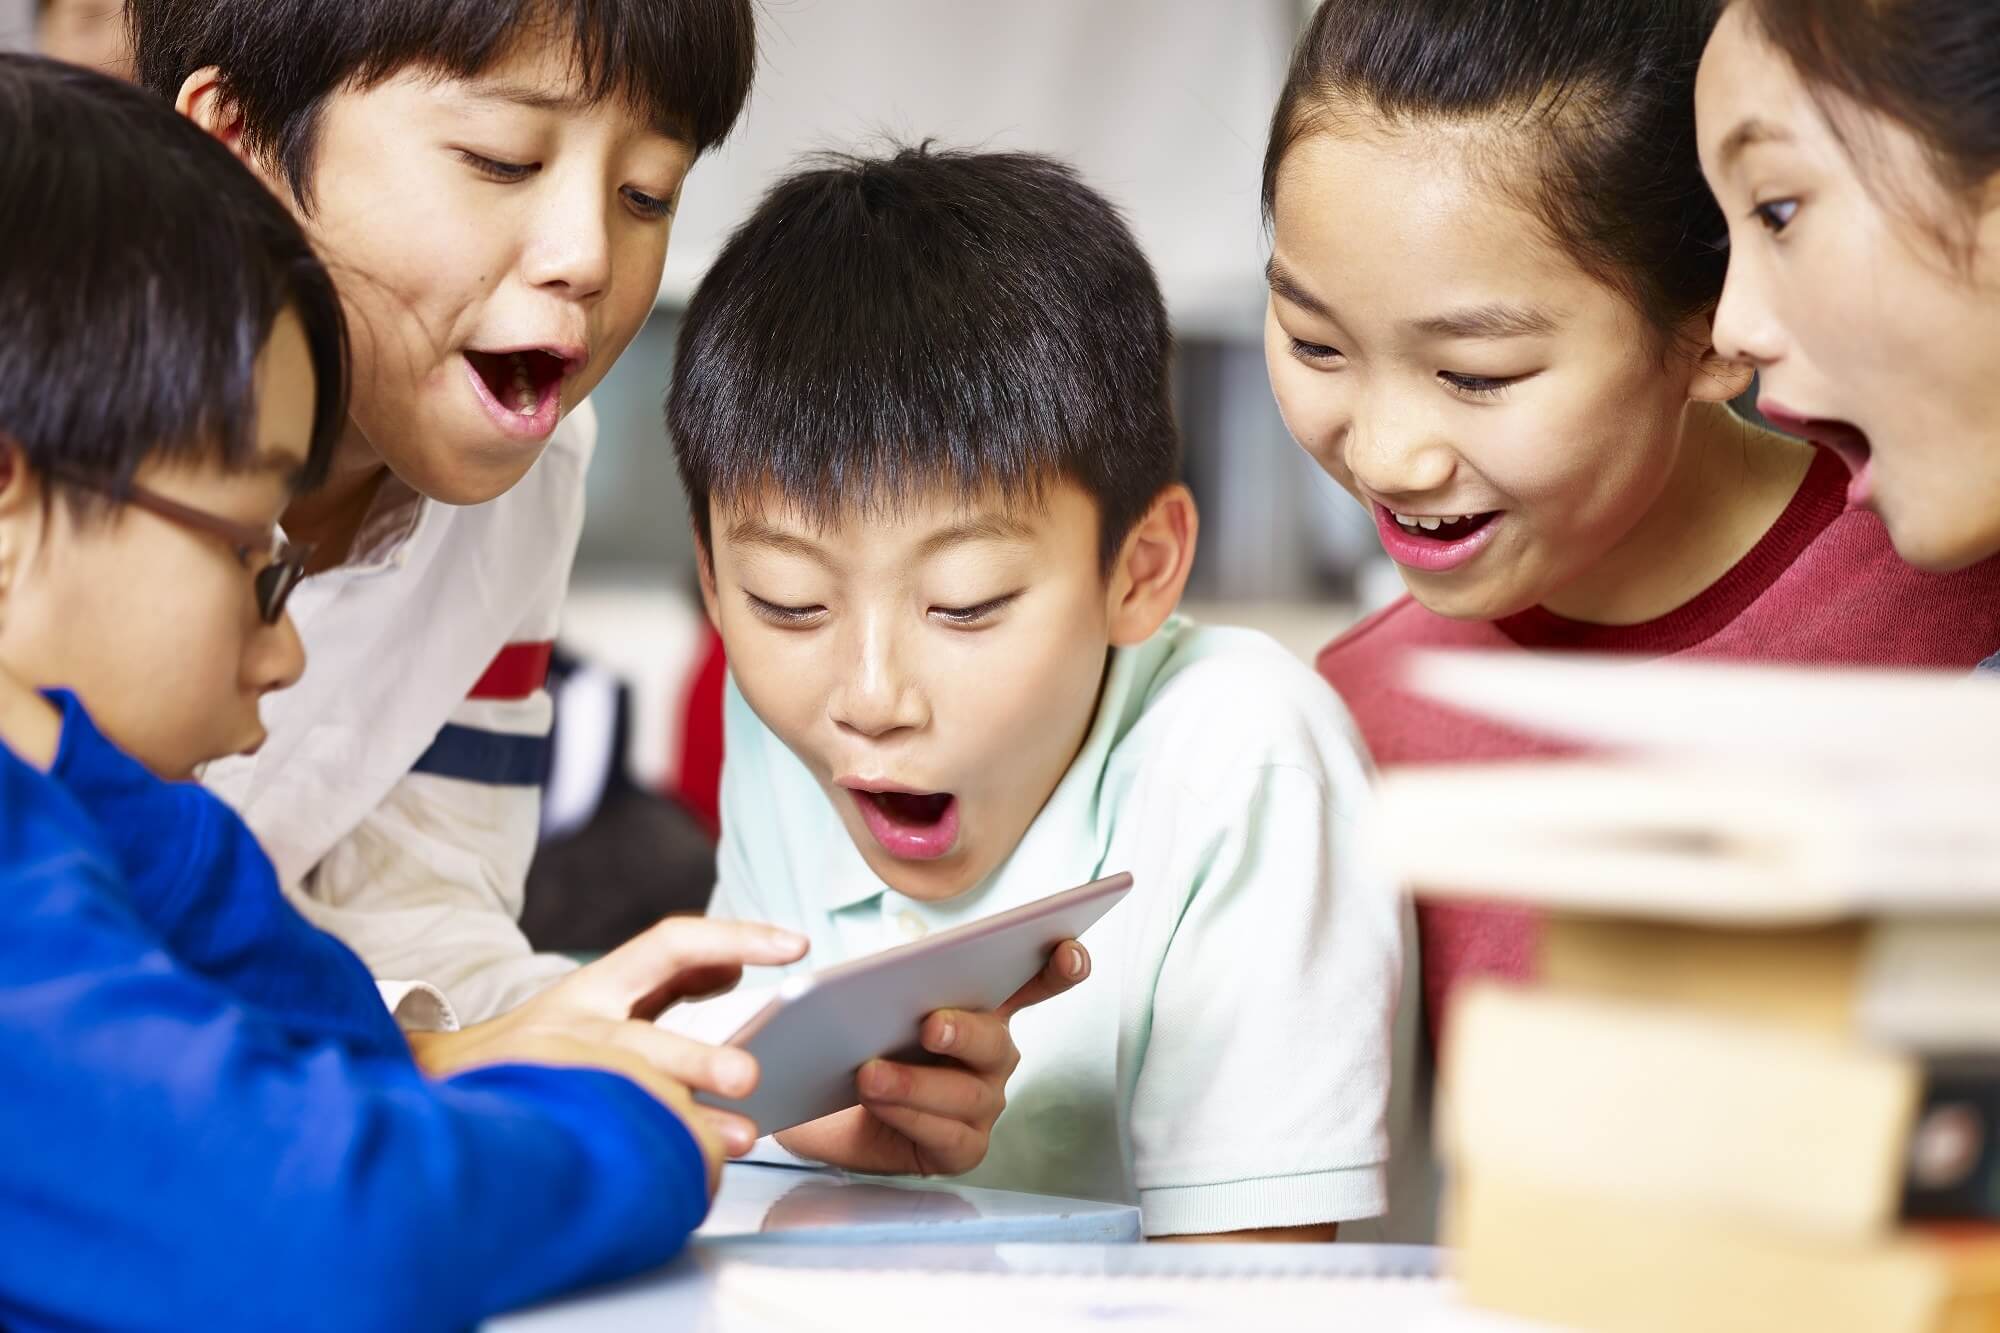 China wants to severely limit young people's mobile use and internet access